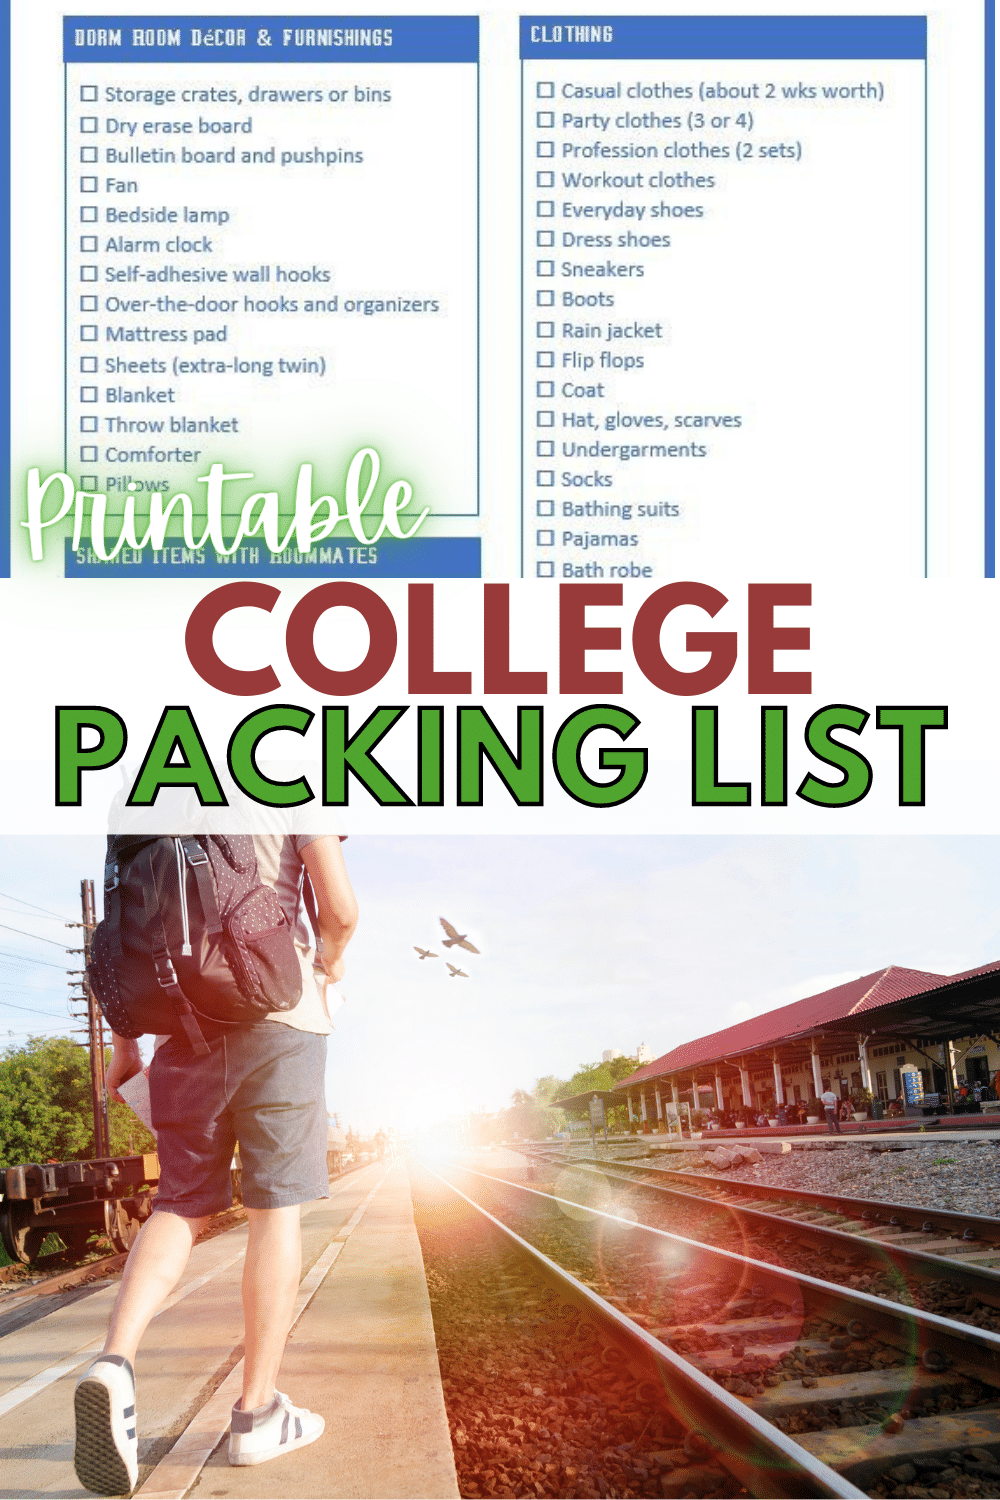 If you have a child going off to college, you'll need to know what to pack. Here's a 2-page college packing list for first-year students moving into a dorm. #collegestudent #collegepackinglist #college #printable via @wondermomwannab